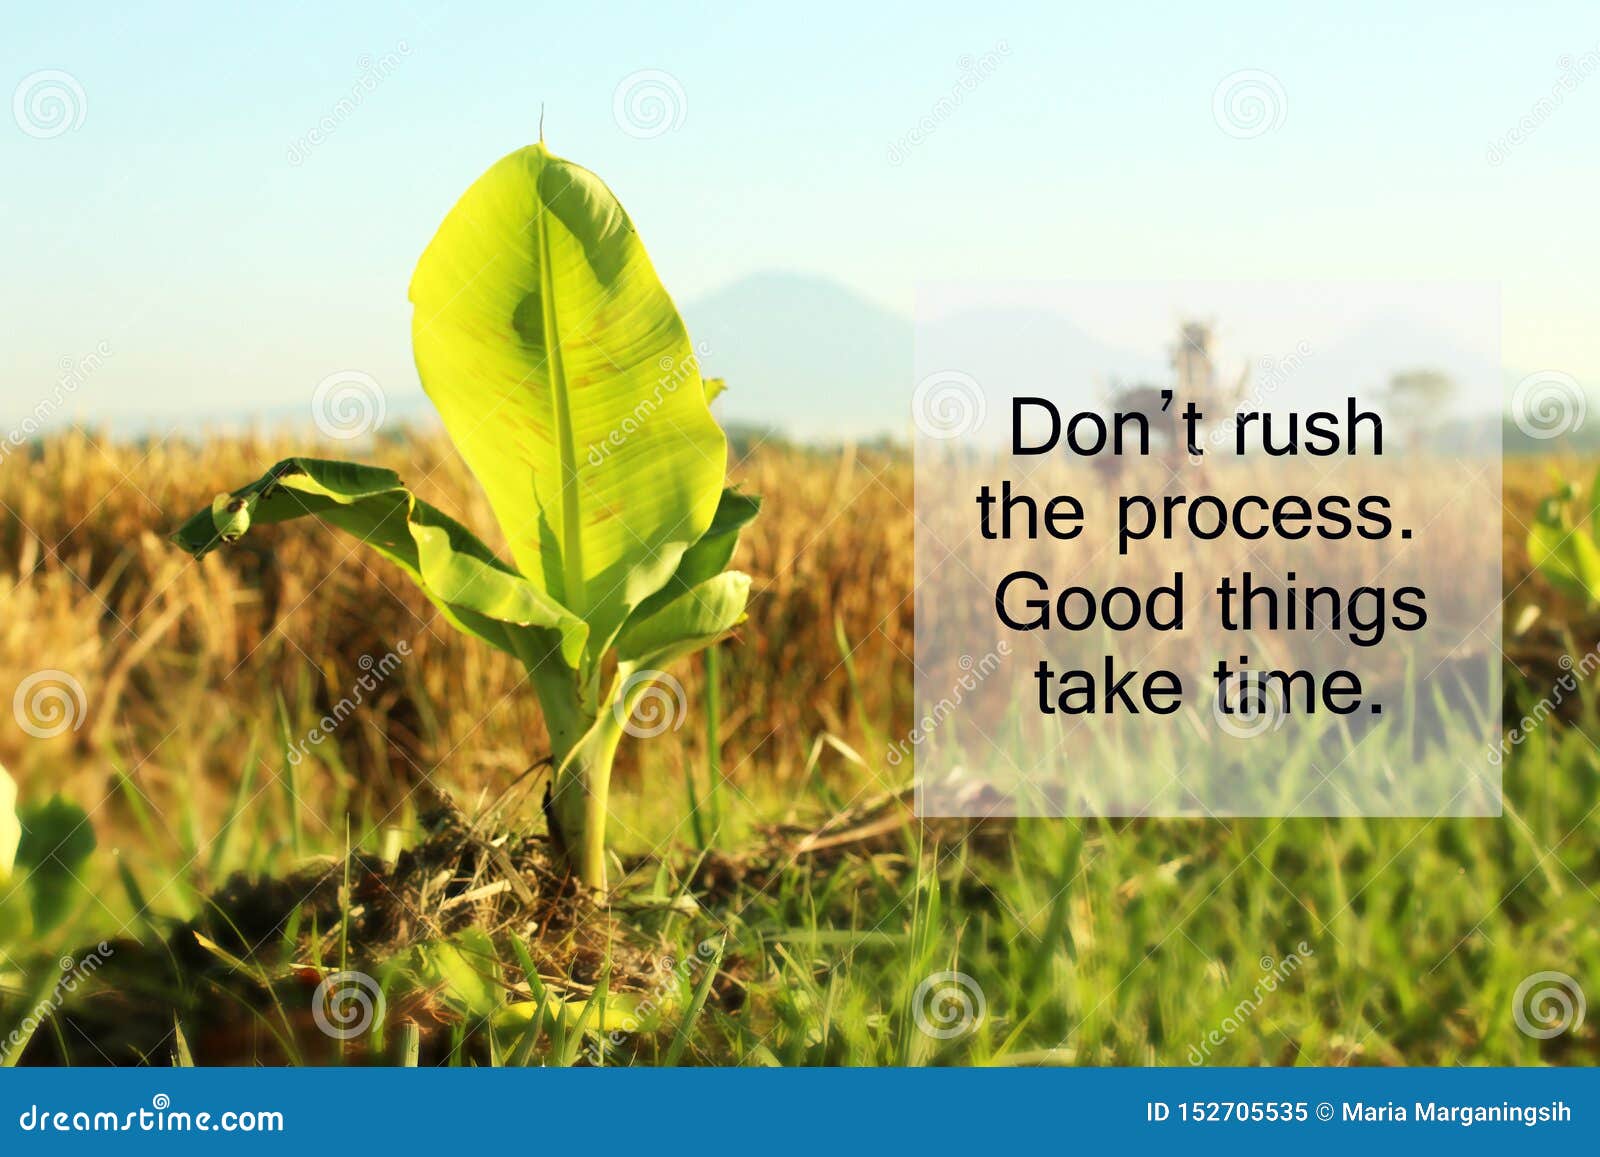 inspirational quote - do not rush the process. good things take time. with baby banana tree growth in the field as .